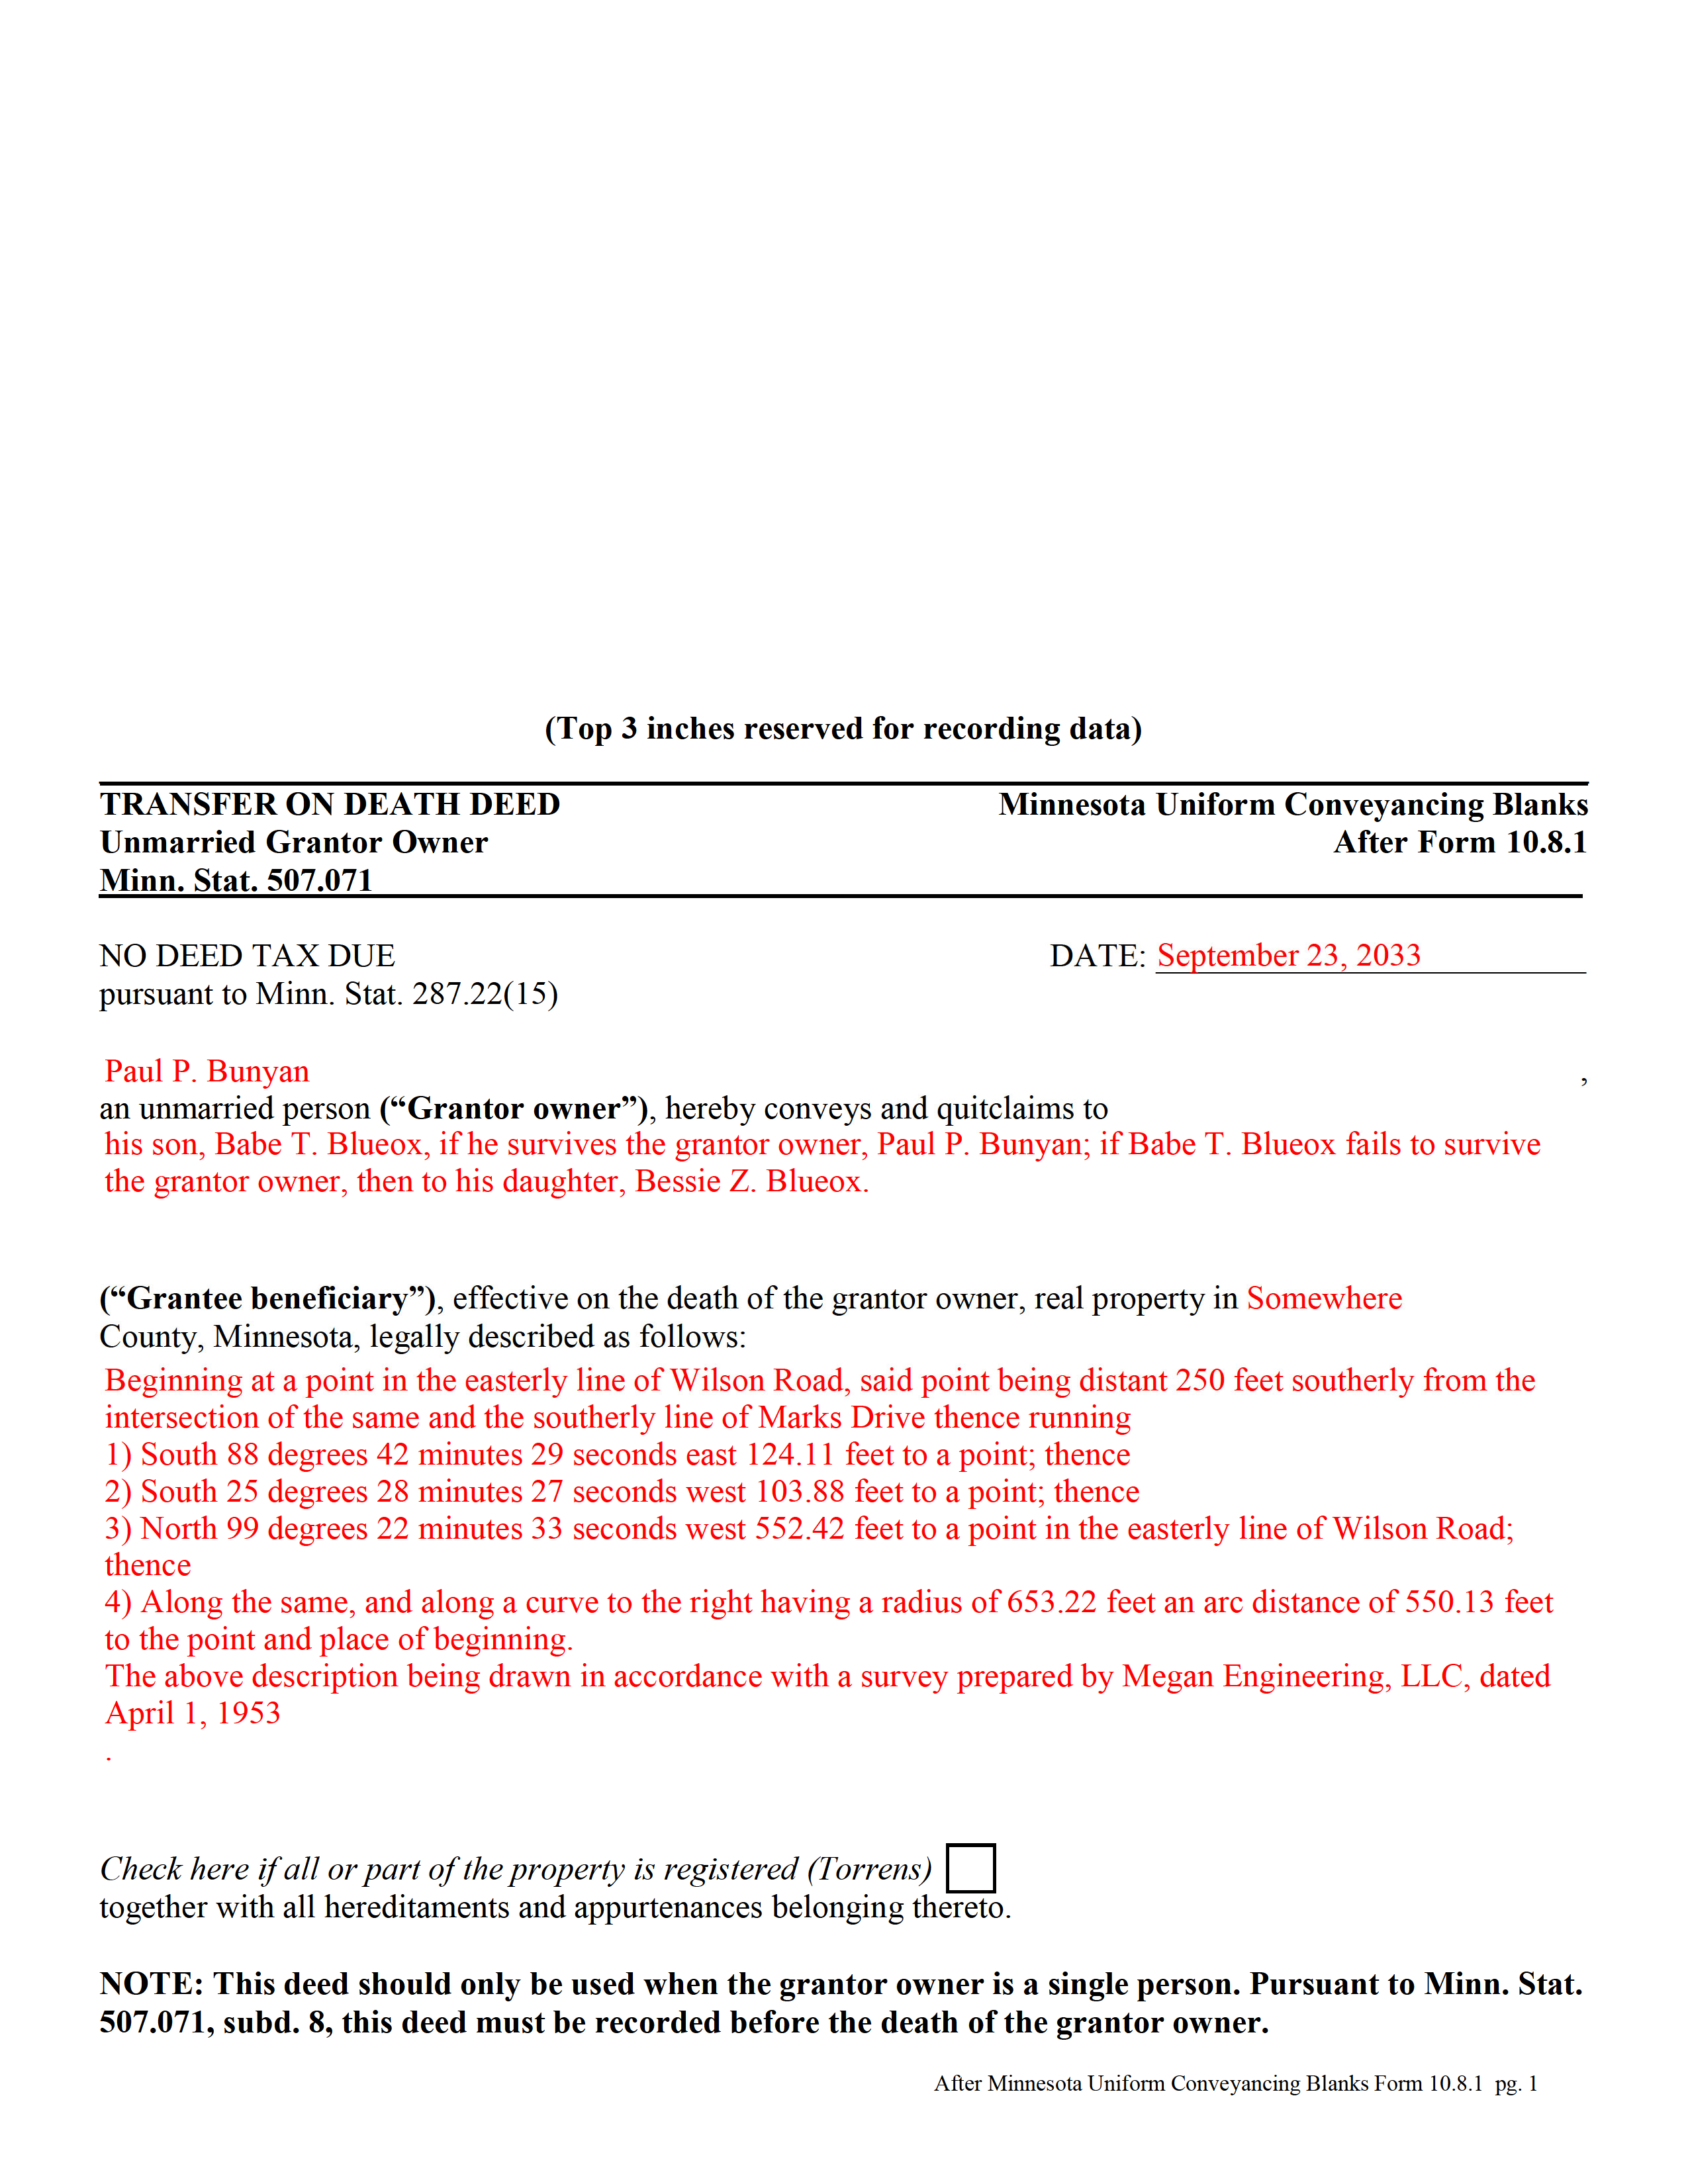 Completed Example of the Transfer on Death Deed by Unmarried Owner Document